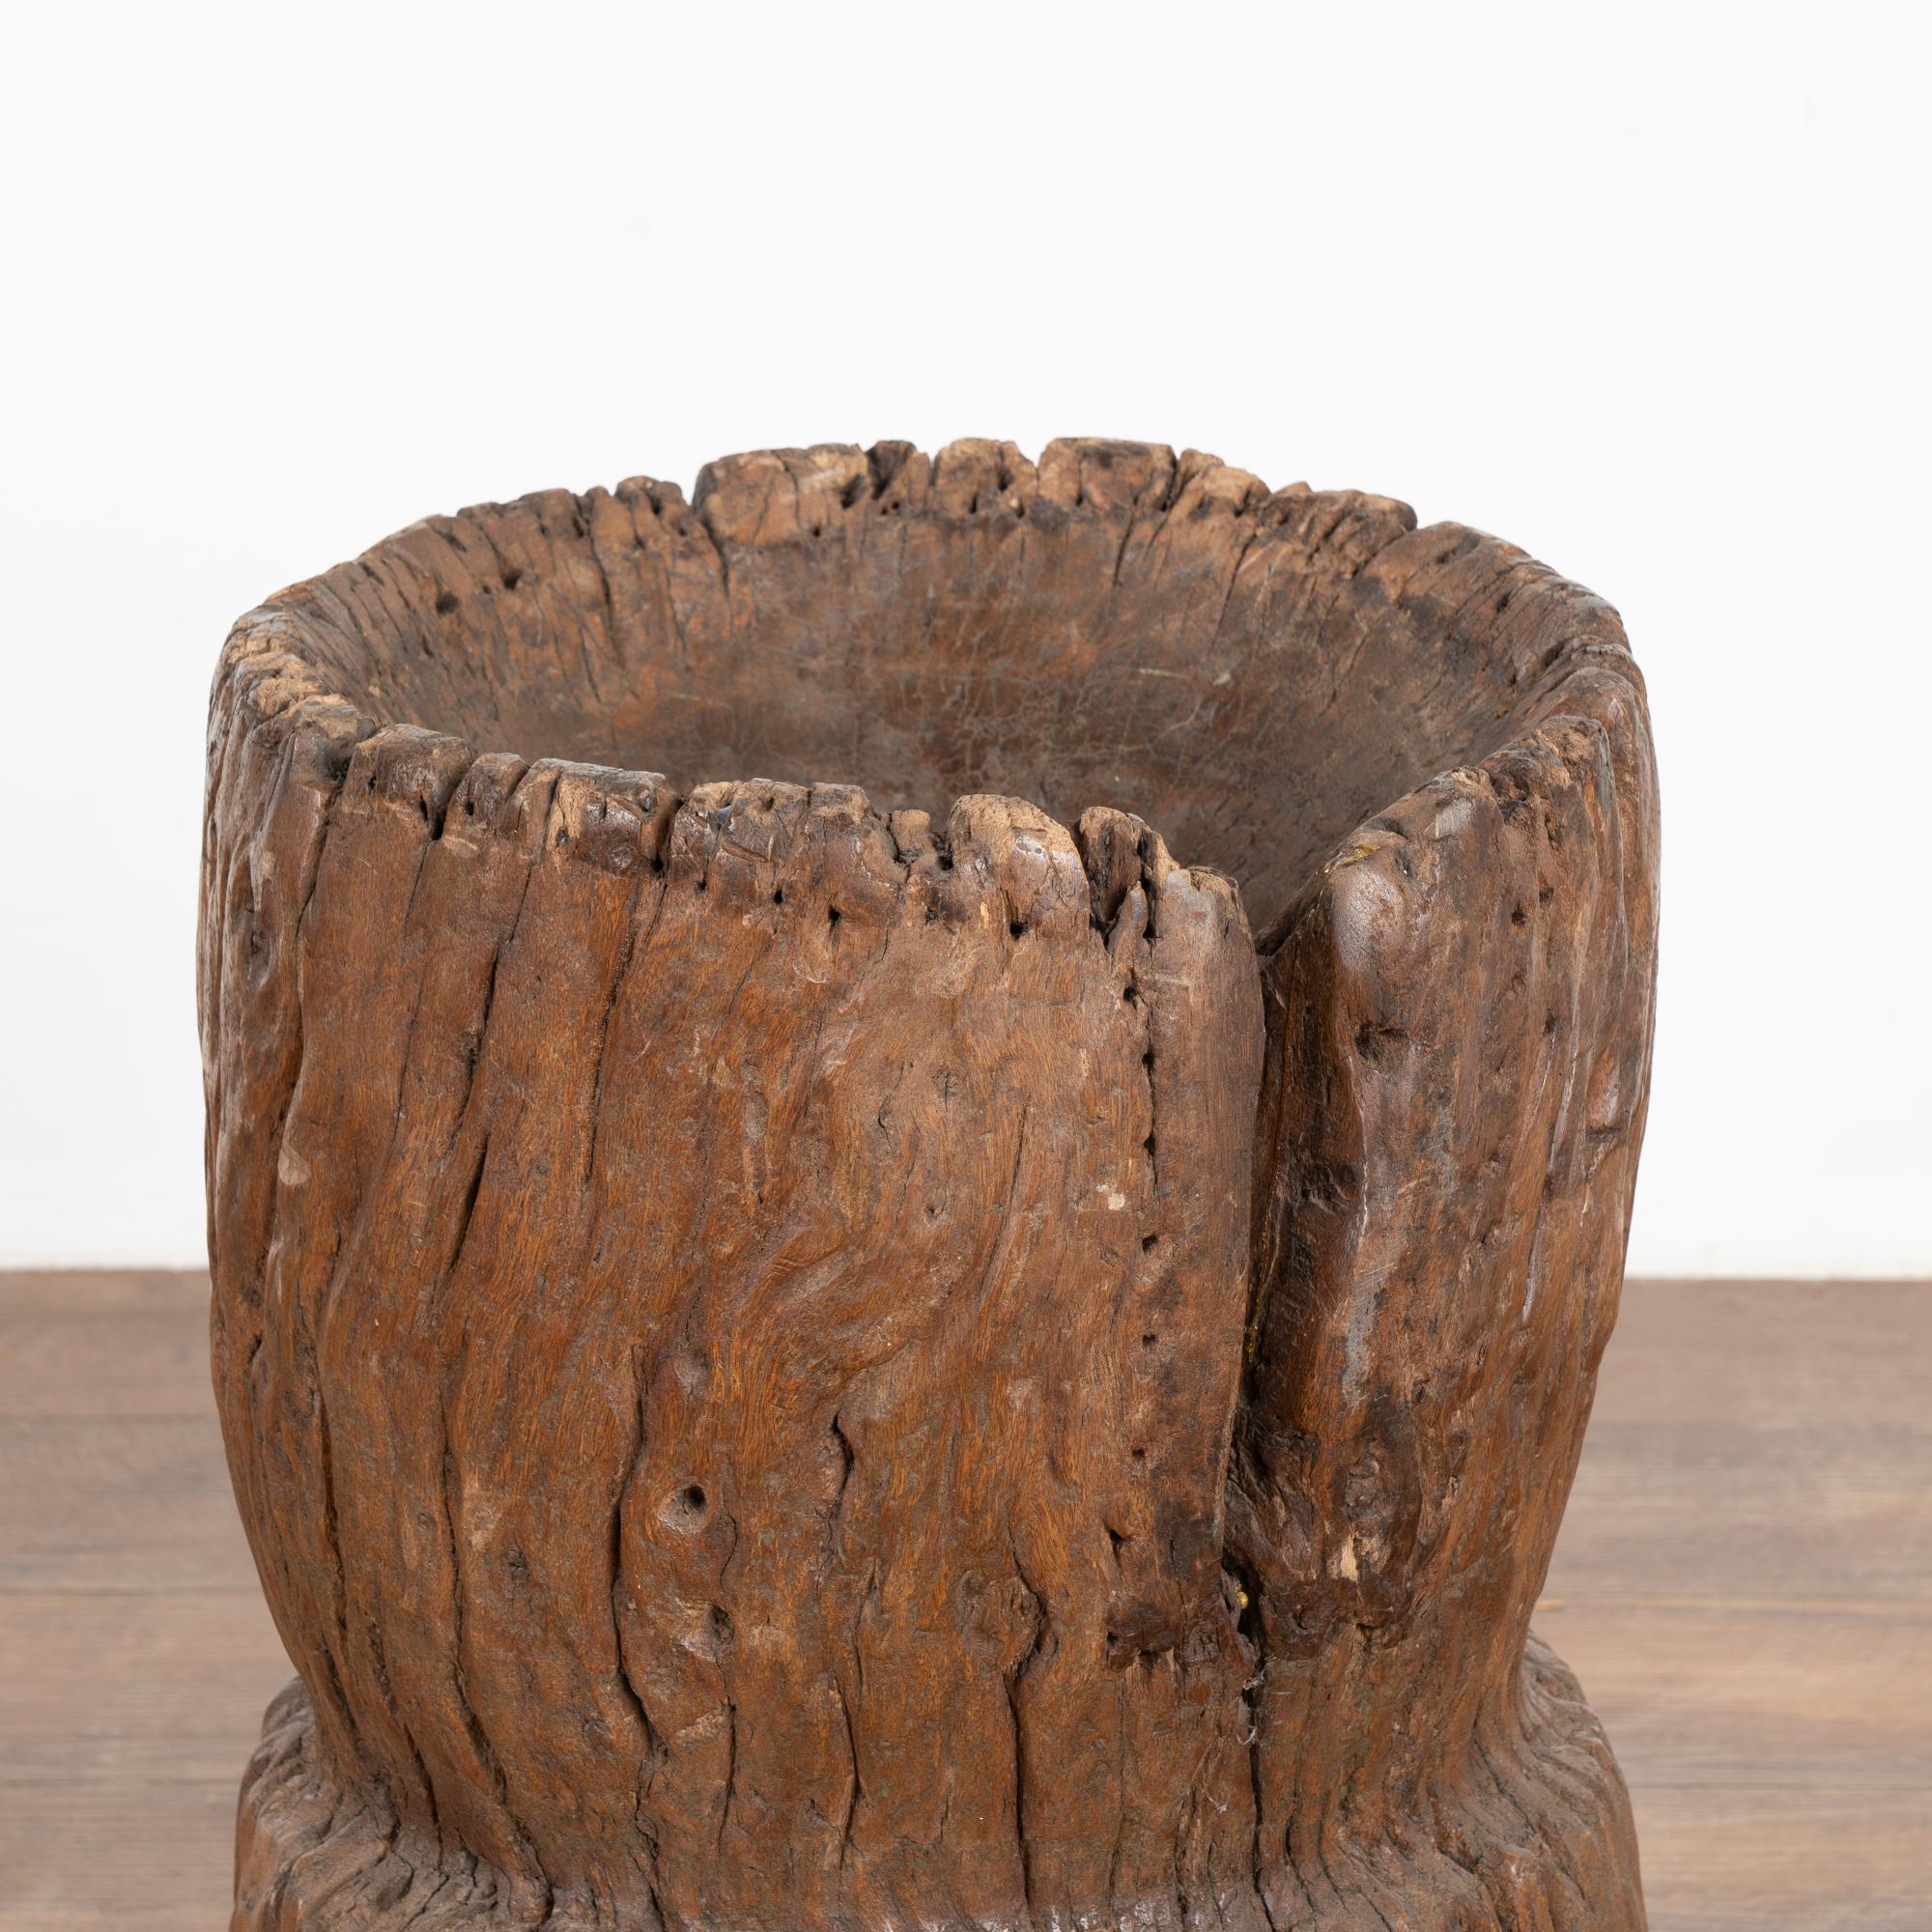 19th Century Wood Sculpture Container from Old Water Mill Gear, China 1820-40 For Sale